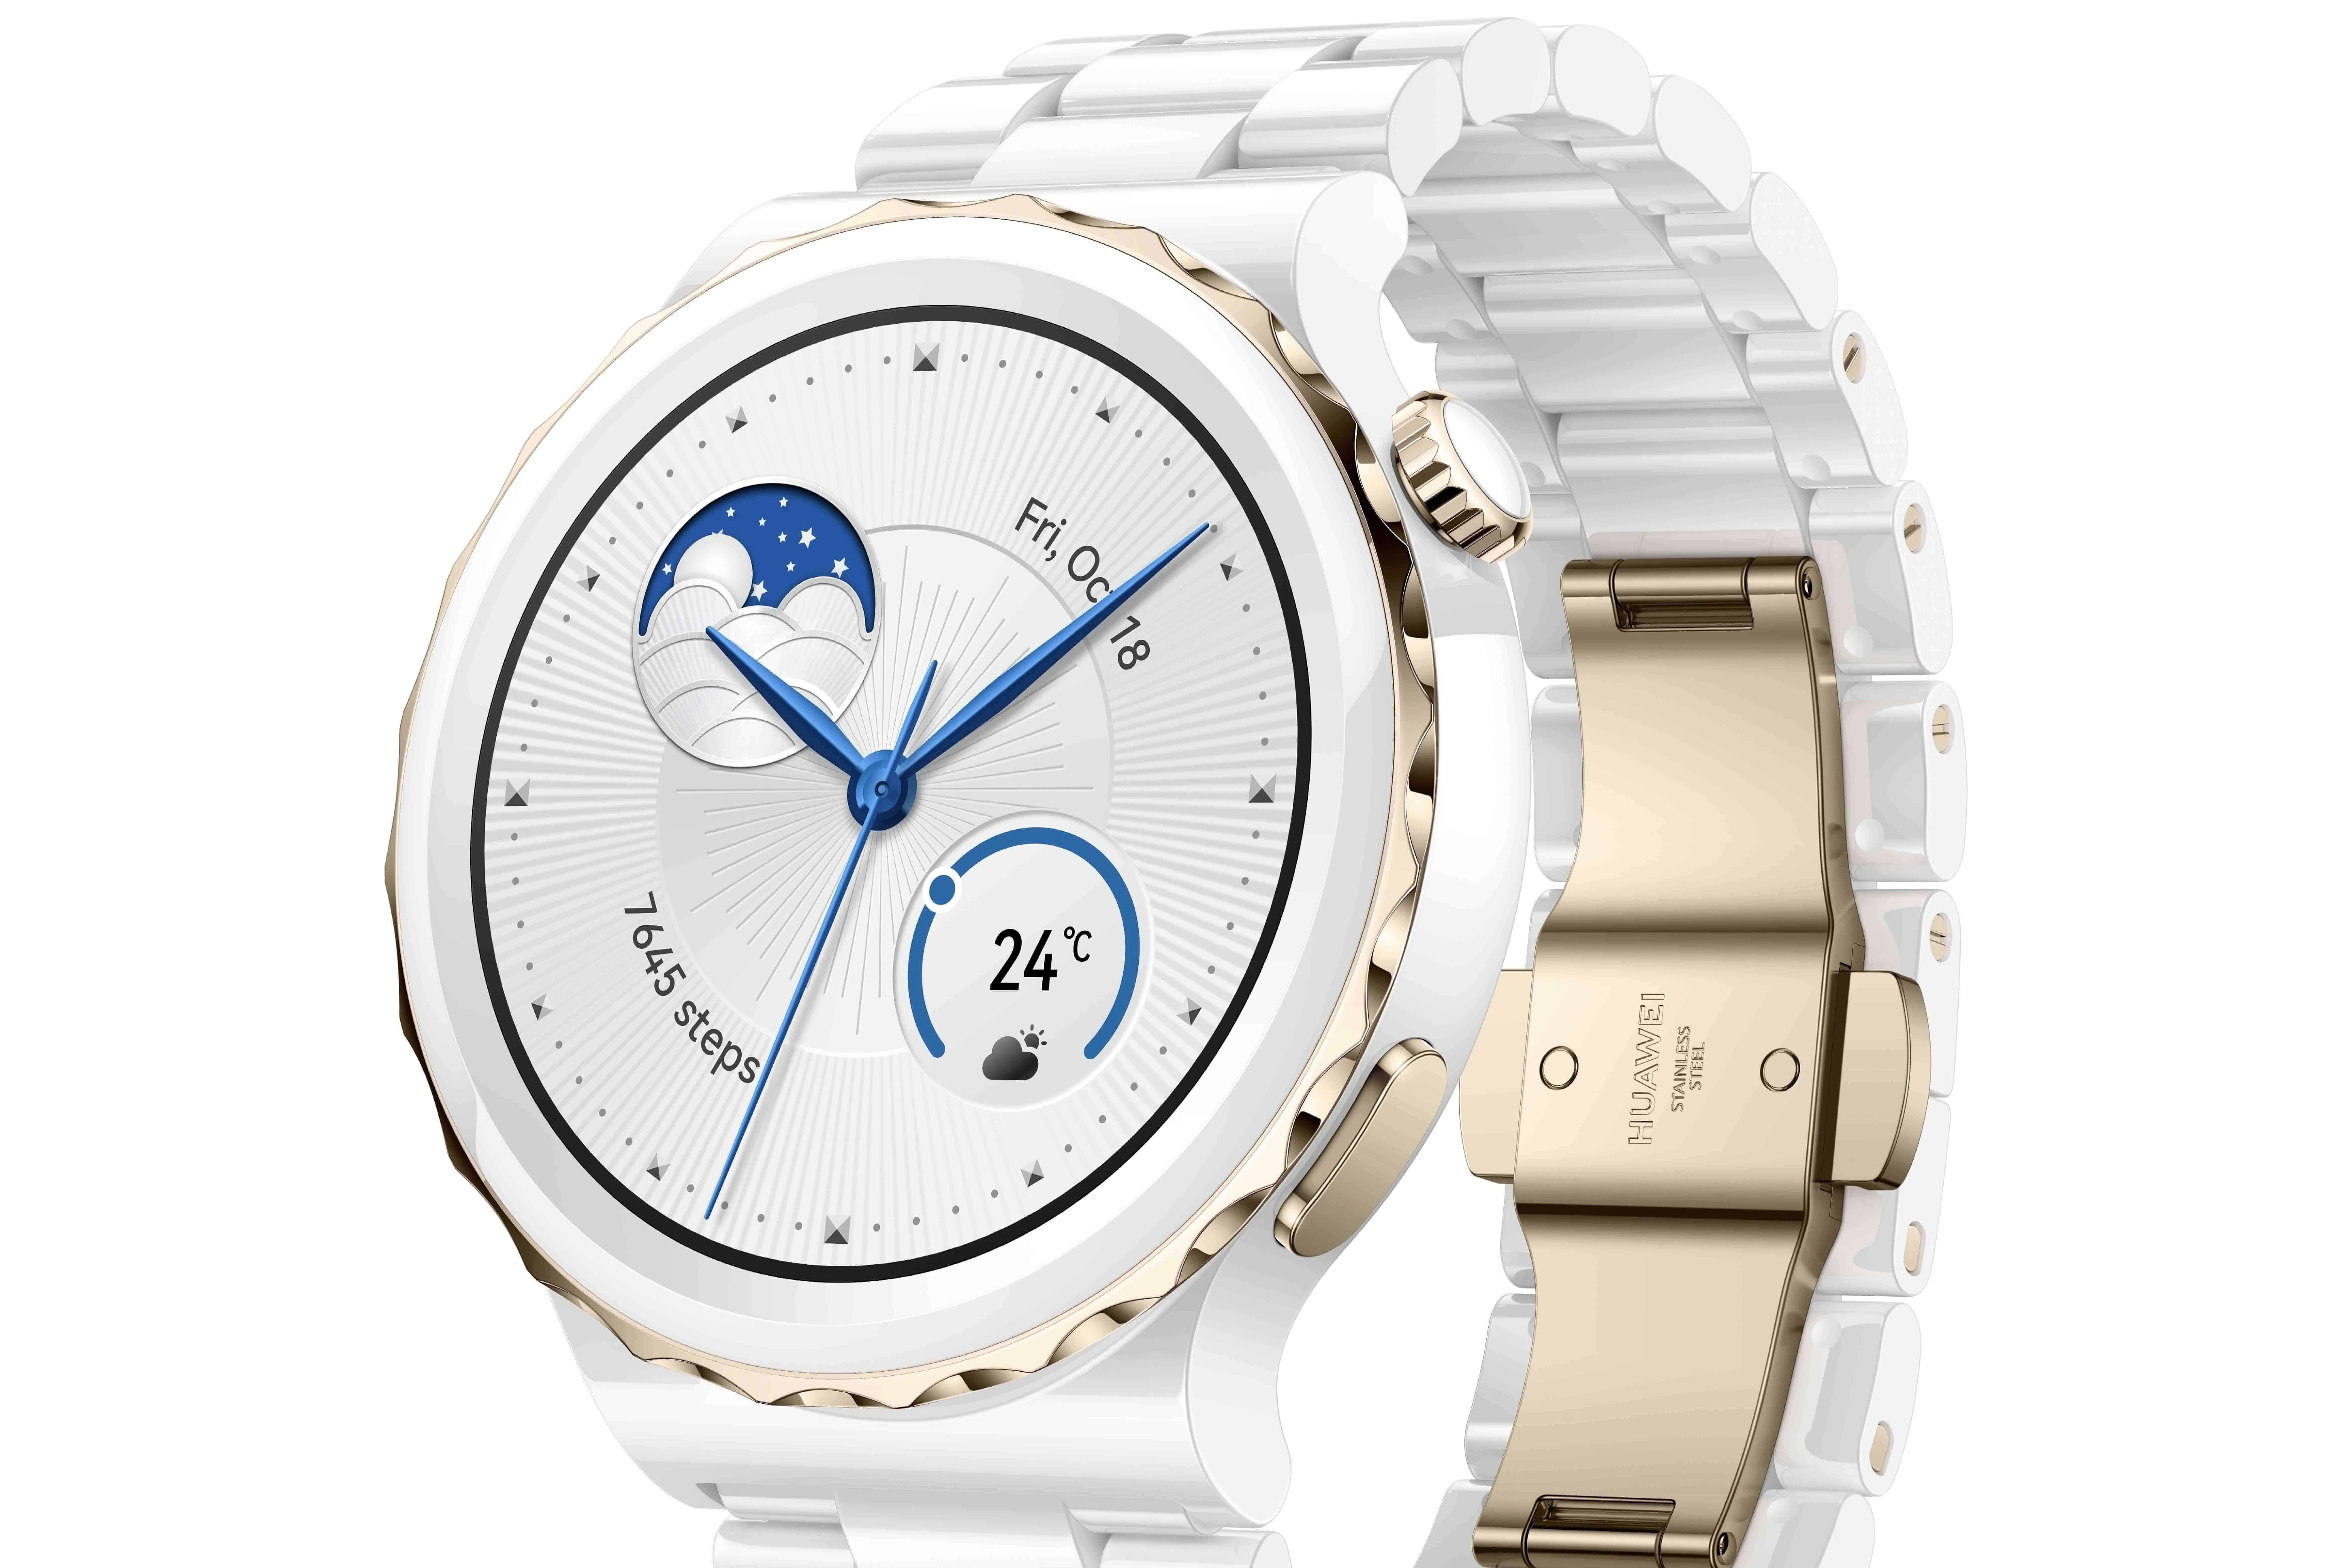 The Huawei Watch GT 3 Pro is official with a premium design and a 14-day battery